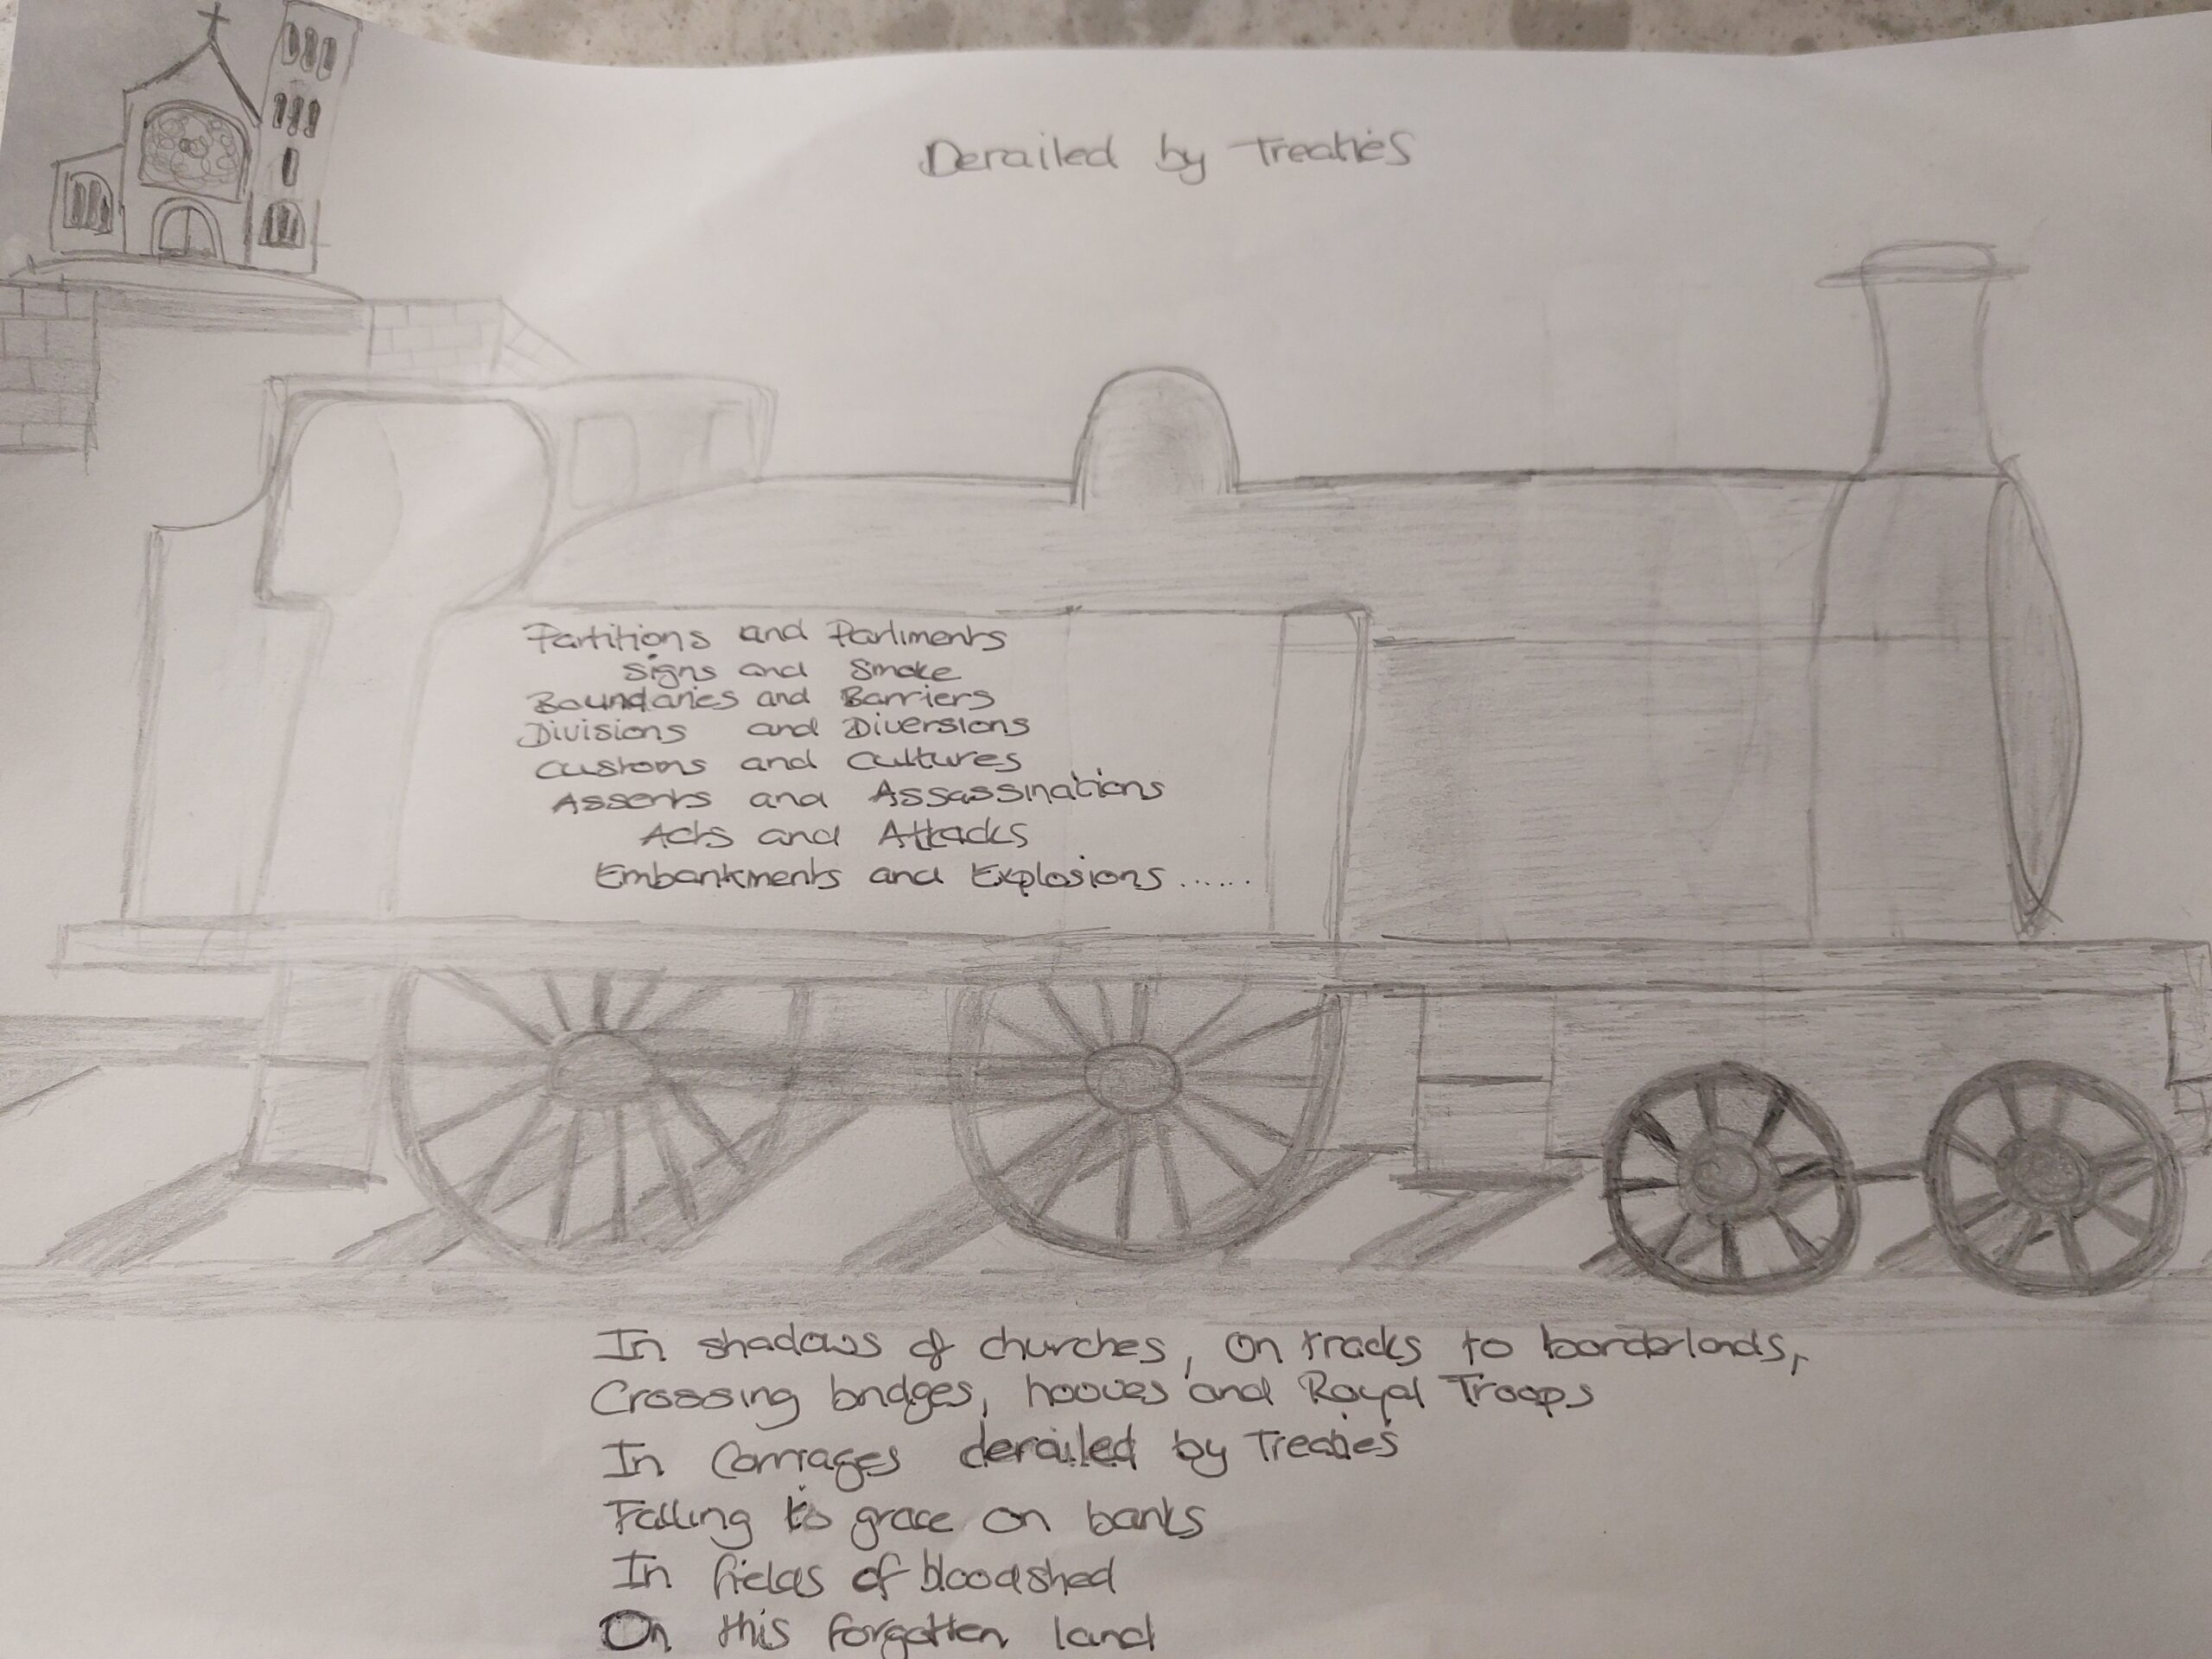 A train sketched in pencil with the words of the poem written over the drawing.